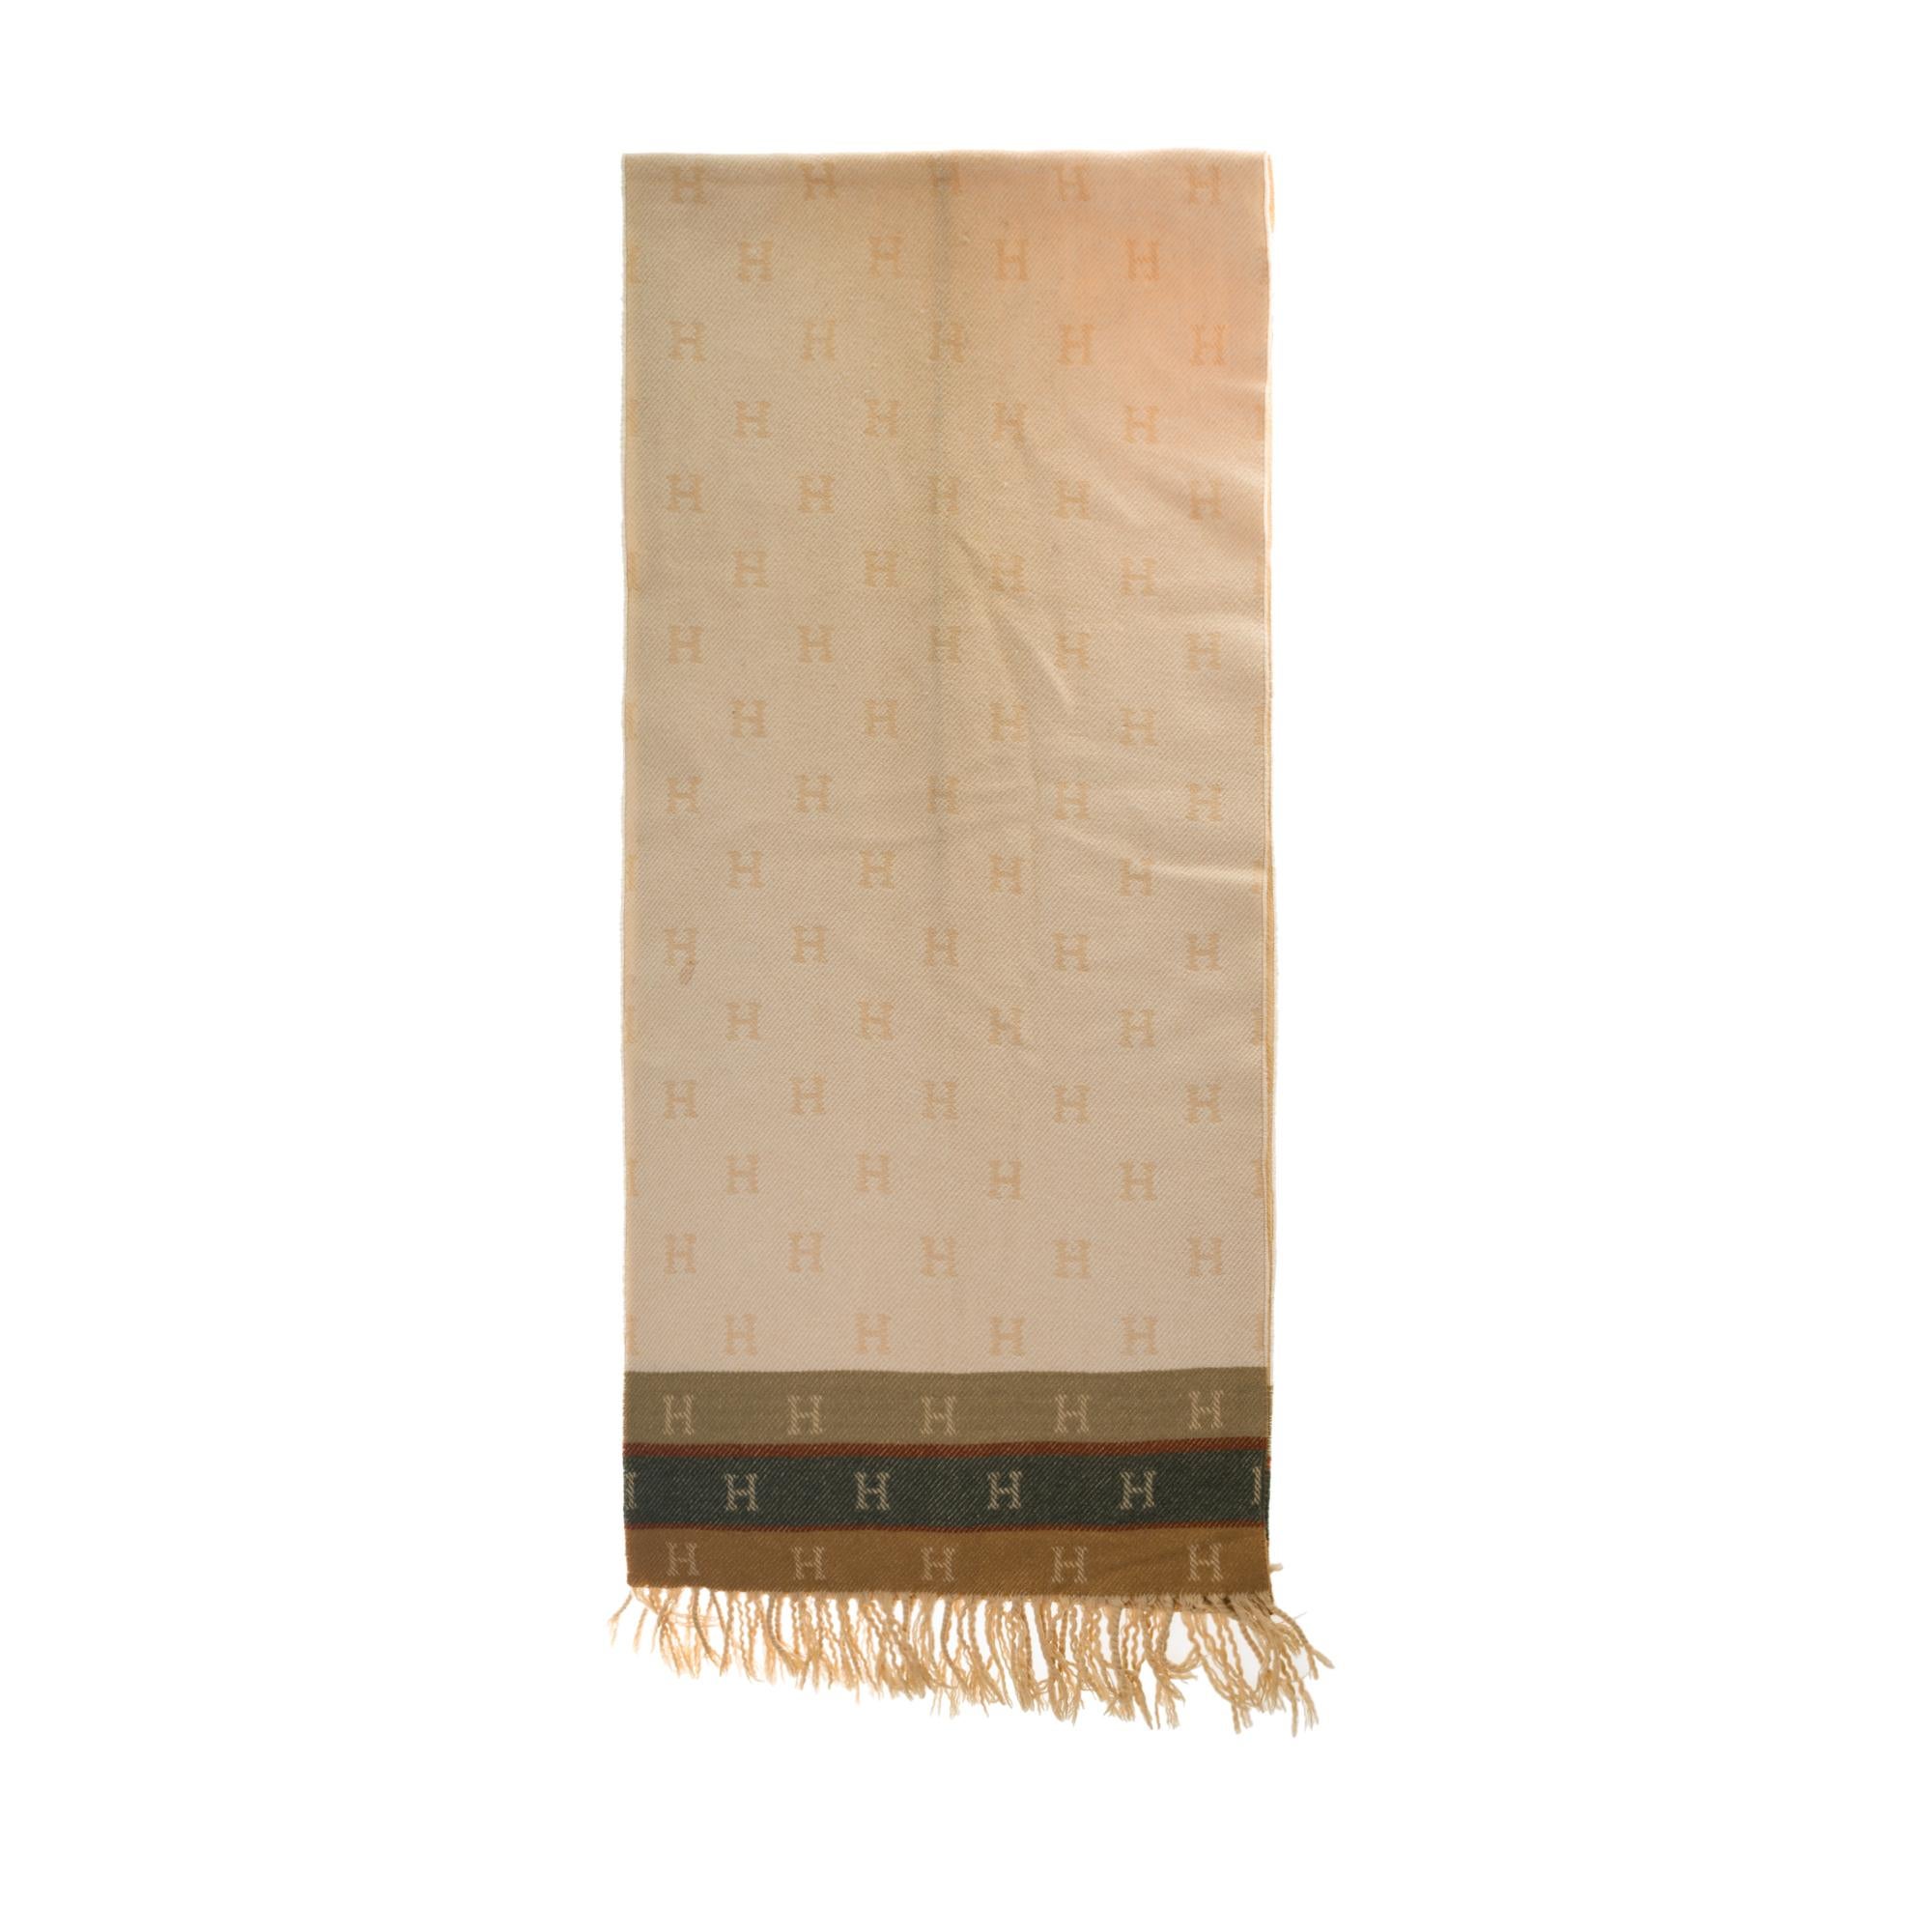 Beautiful Hermès wool and cashmere scarf with beige, brown and grey Hermès monogram, fringed finishes.
Composition: 80% Wool, 20% Cashmere.
Signature: 